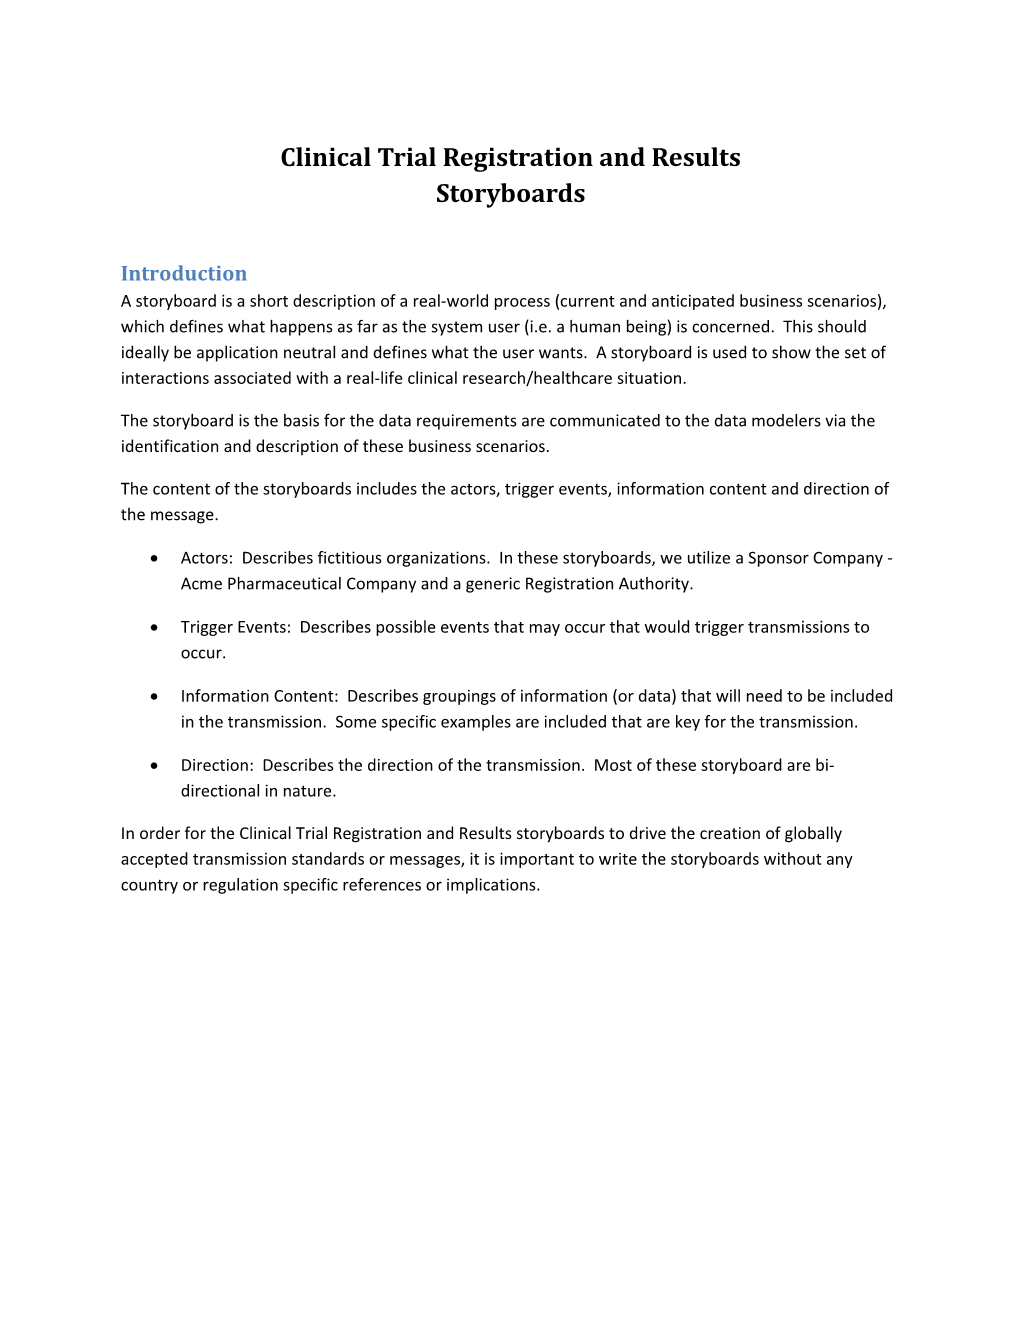 Clinical Trial Registration and Results Storyboards